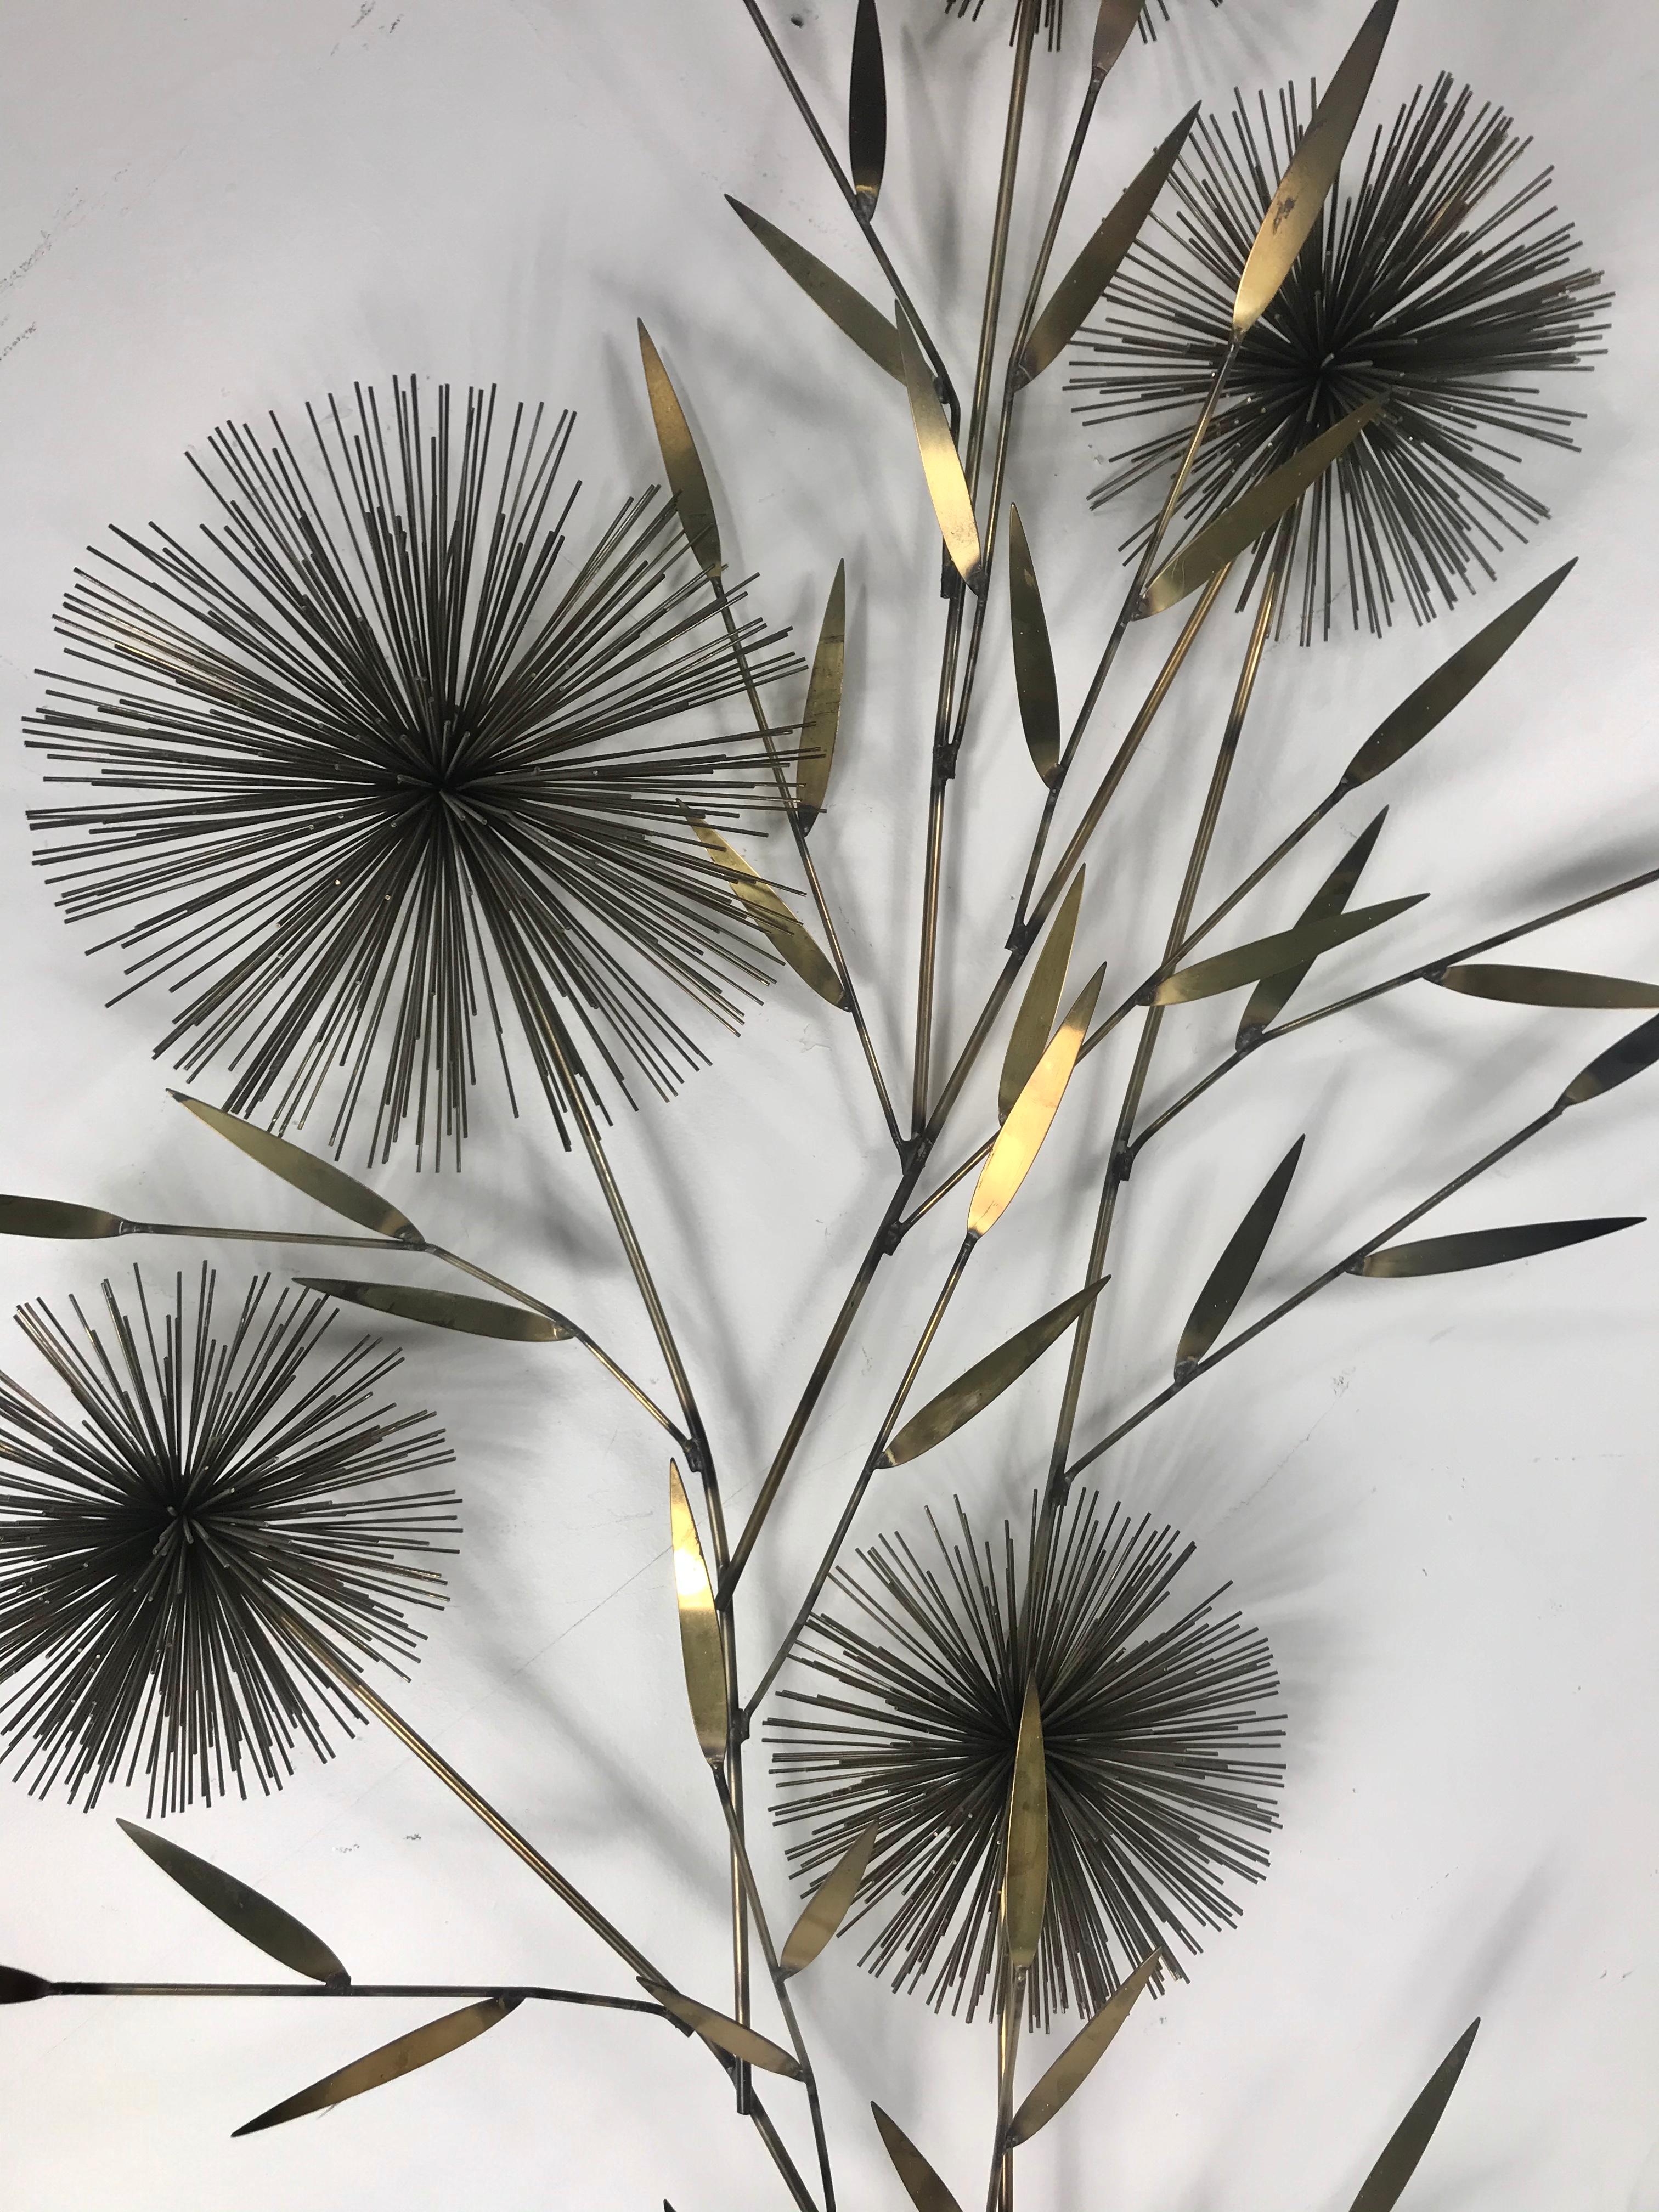 Stunning Mid-Century Modern wall sculpture consisting of 5 sprays / branch in the manner of Harry Bertoia. Designed by C. Jere, retains original C JERE 1979 SIGNATURE. Wonderful original patina. Hand delivery avail to New York City or anywhere en